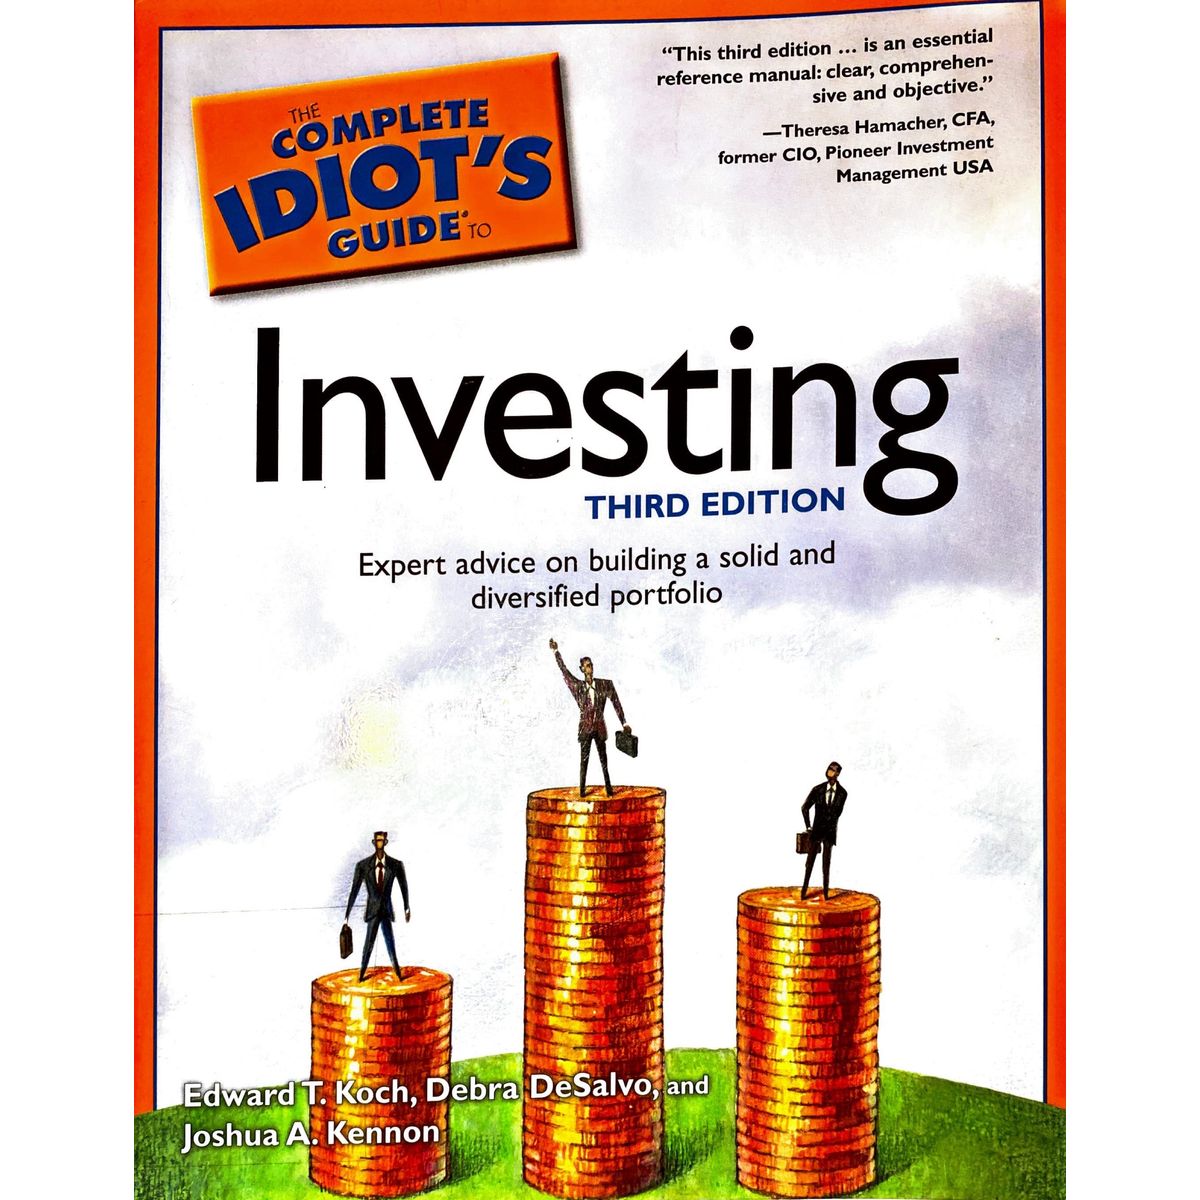 ISBN: 9781592574803 / 1592574807 - The Complete Idiot's Guide To Investing by Edward T. Koch, Debra DeSalvo and Joshua Kennon, 3rd Edition [2006]